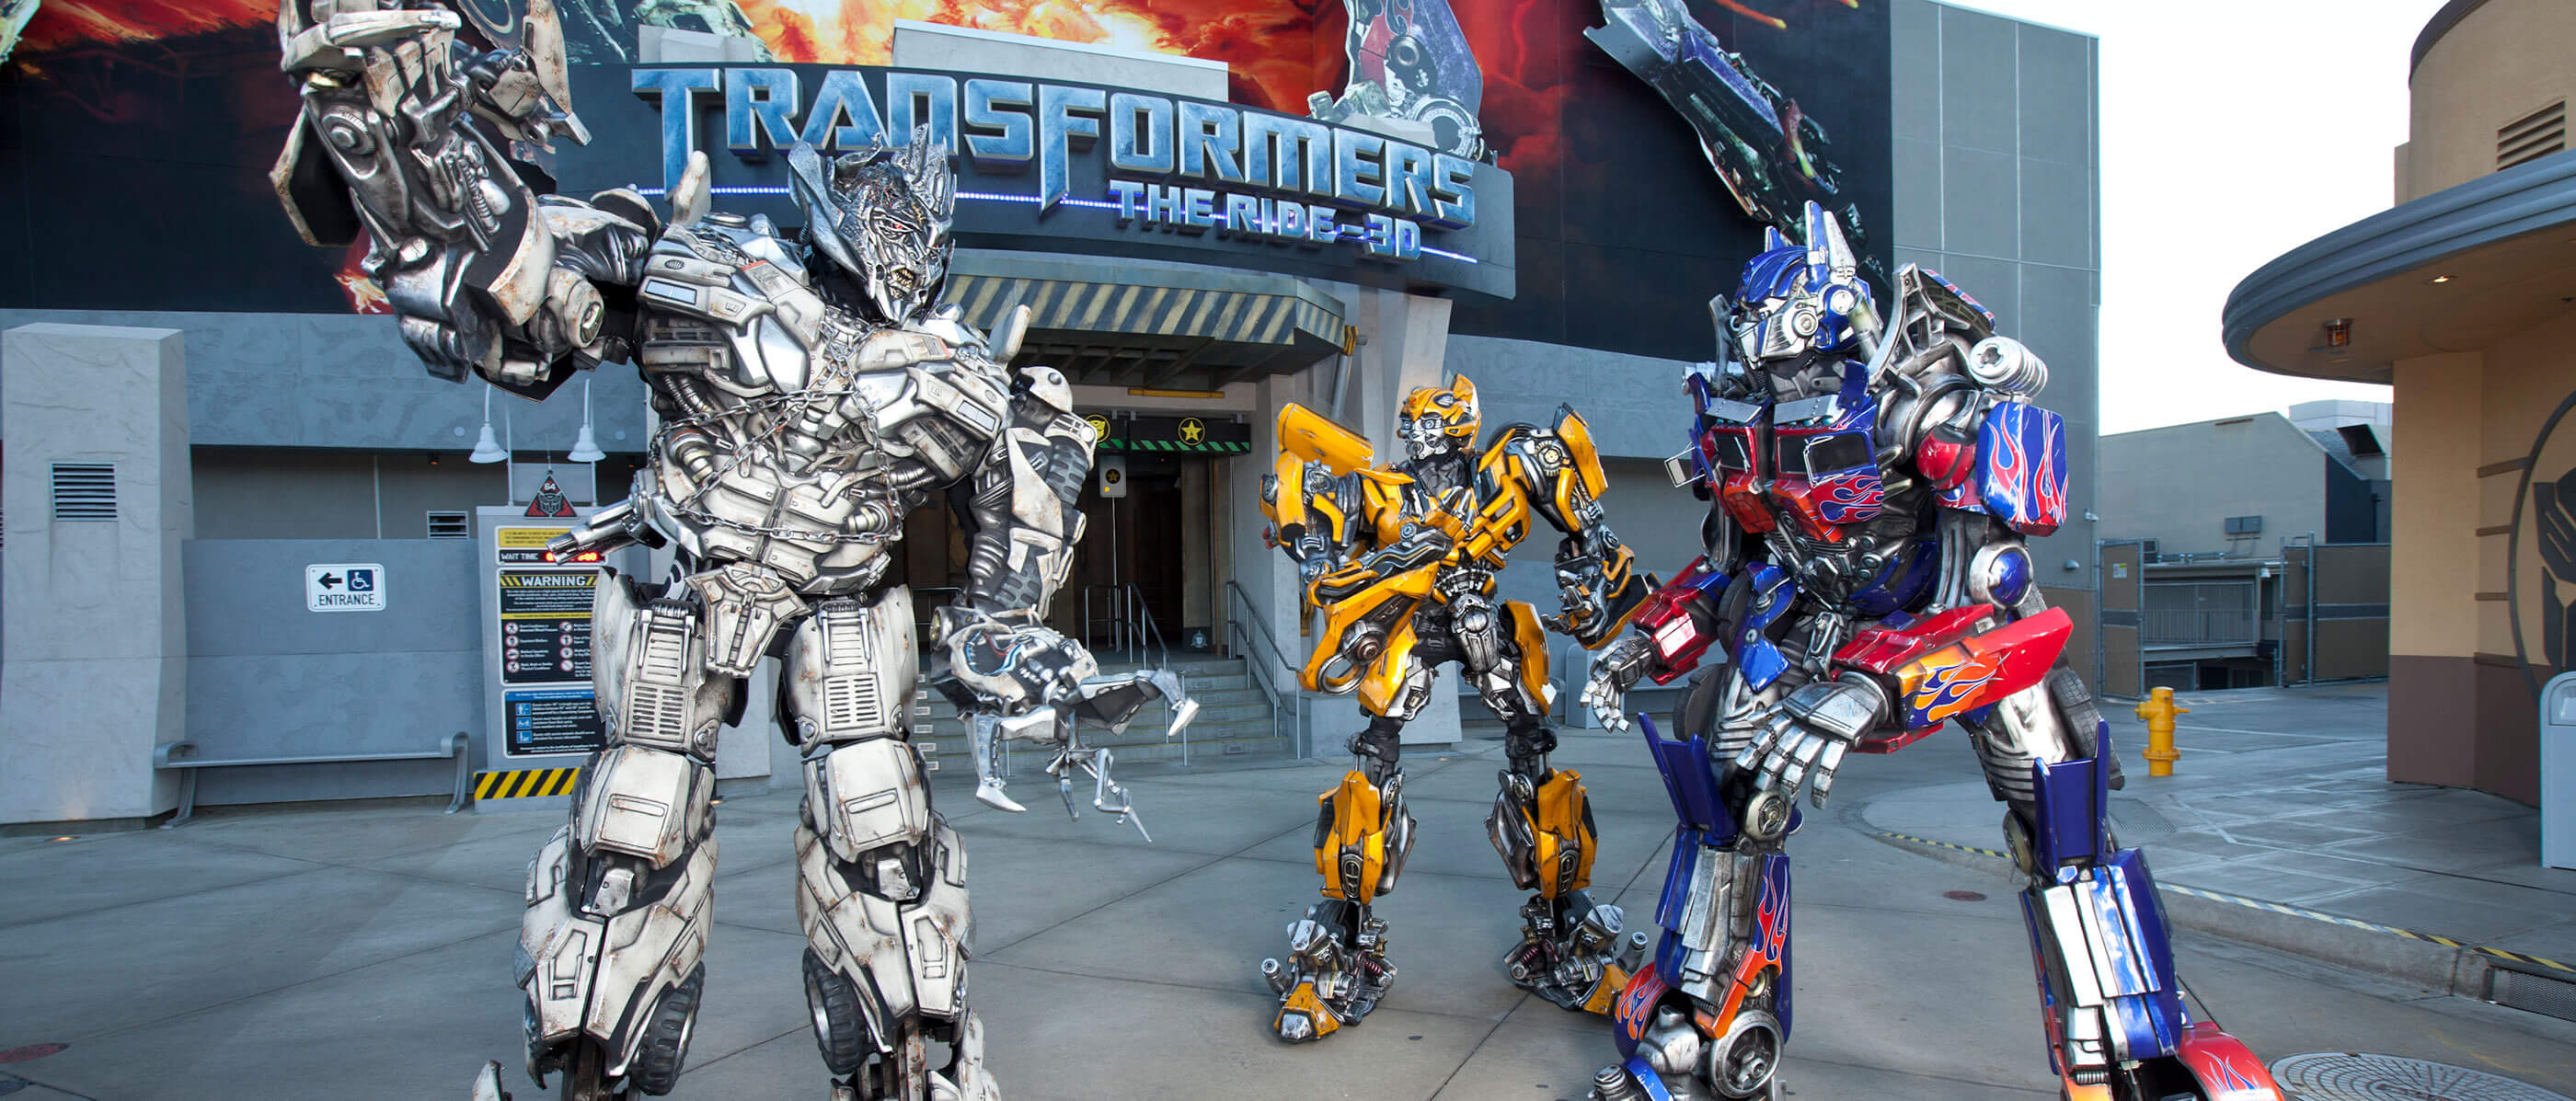 transformers the ride 3d universal studios hollywood